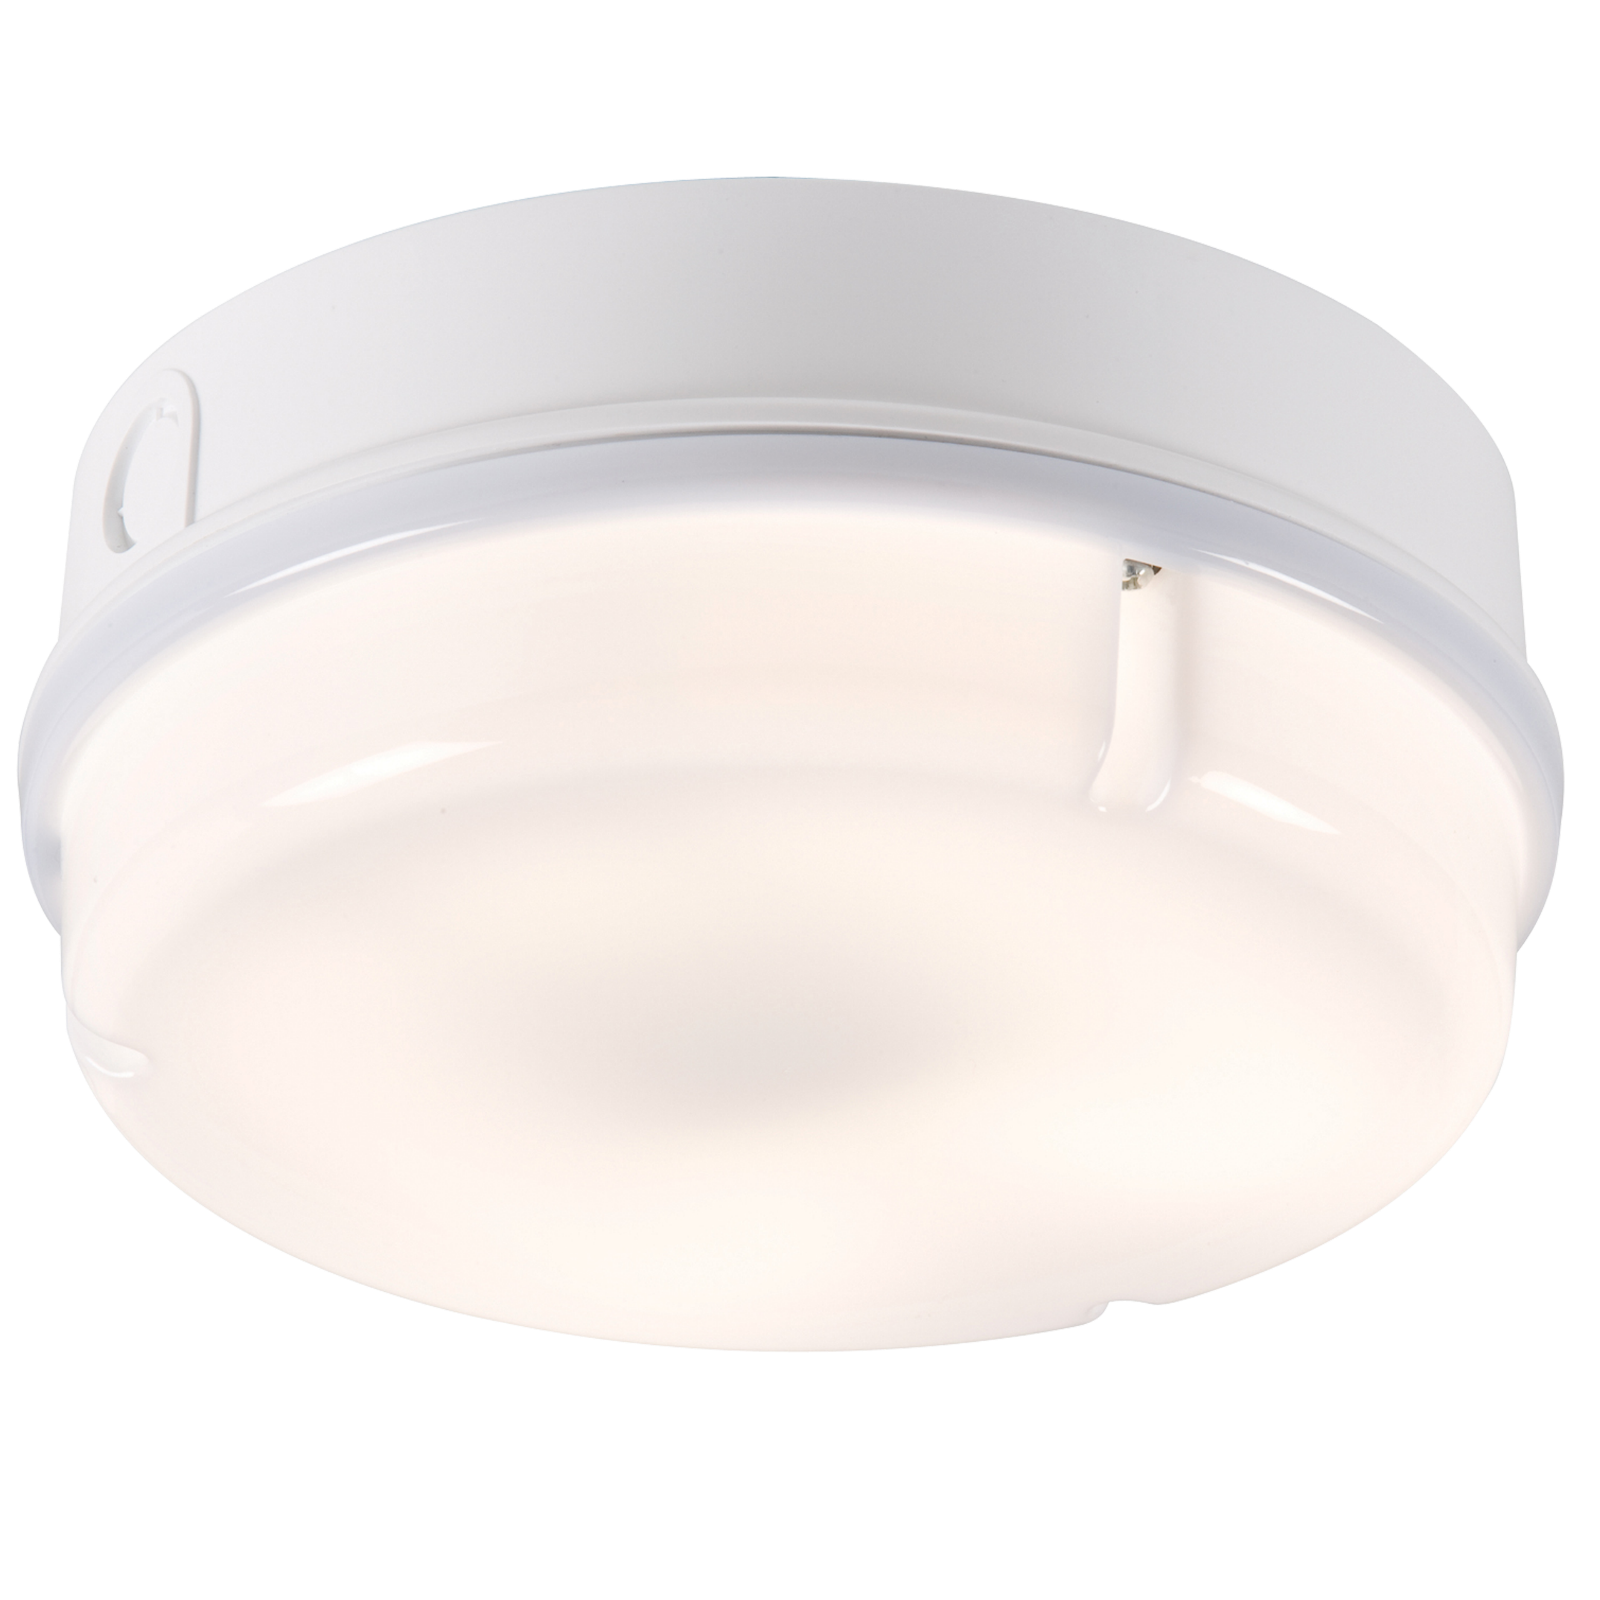 IP65 16W HF Round Bulkhead With Opal Diffuser And White Base - TPR16WOHF 